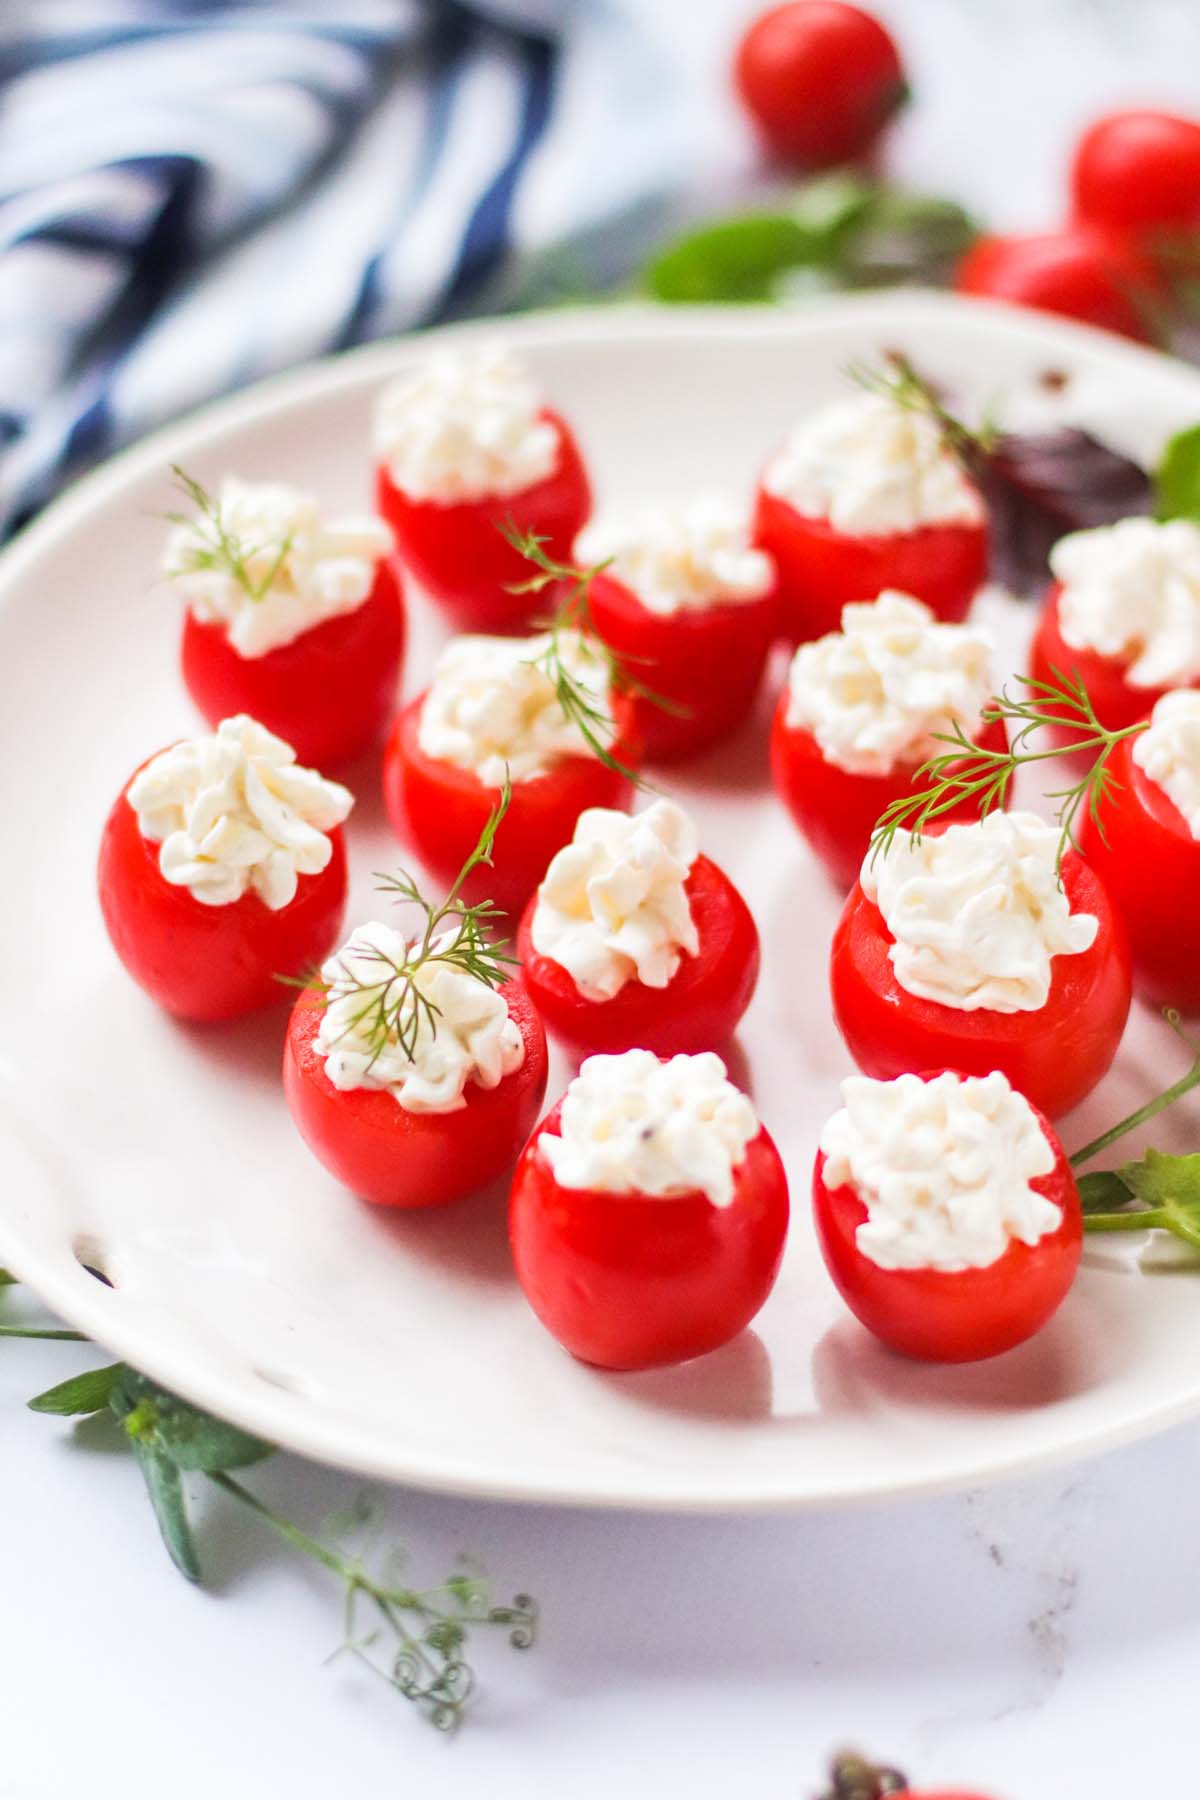 stuffed cherry tomatoes on a plate.